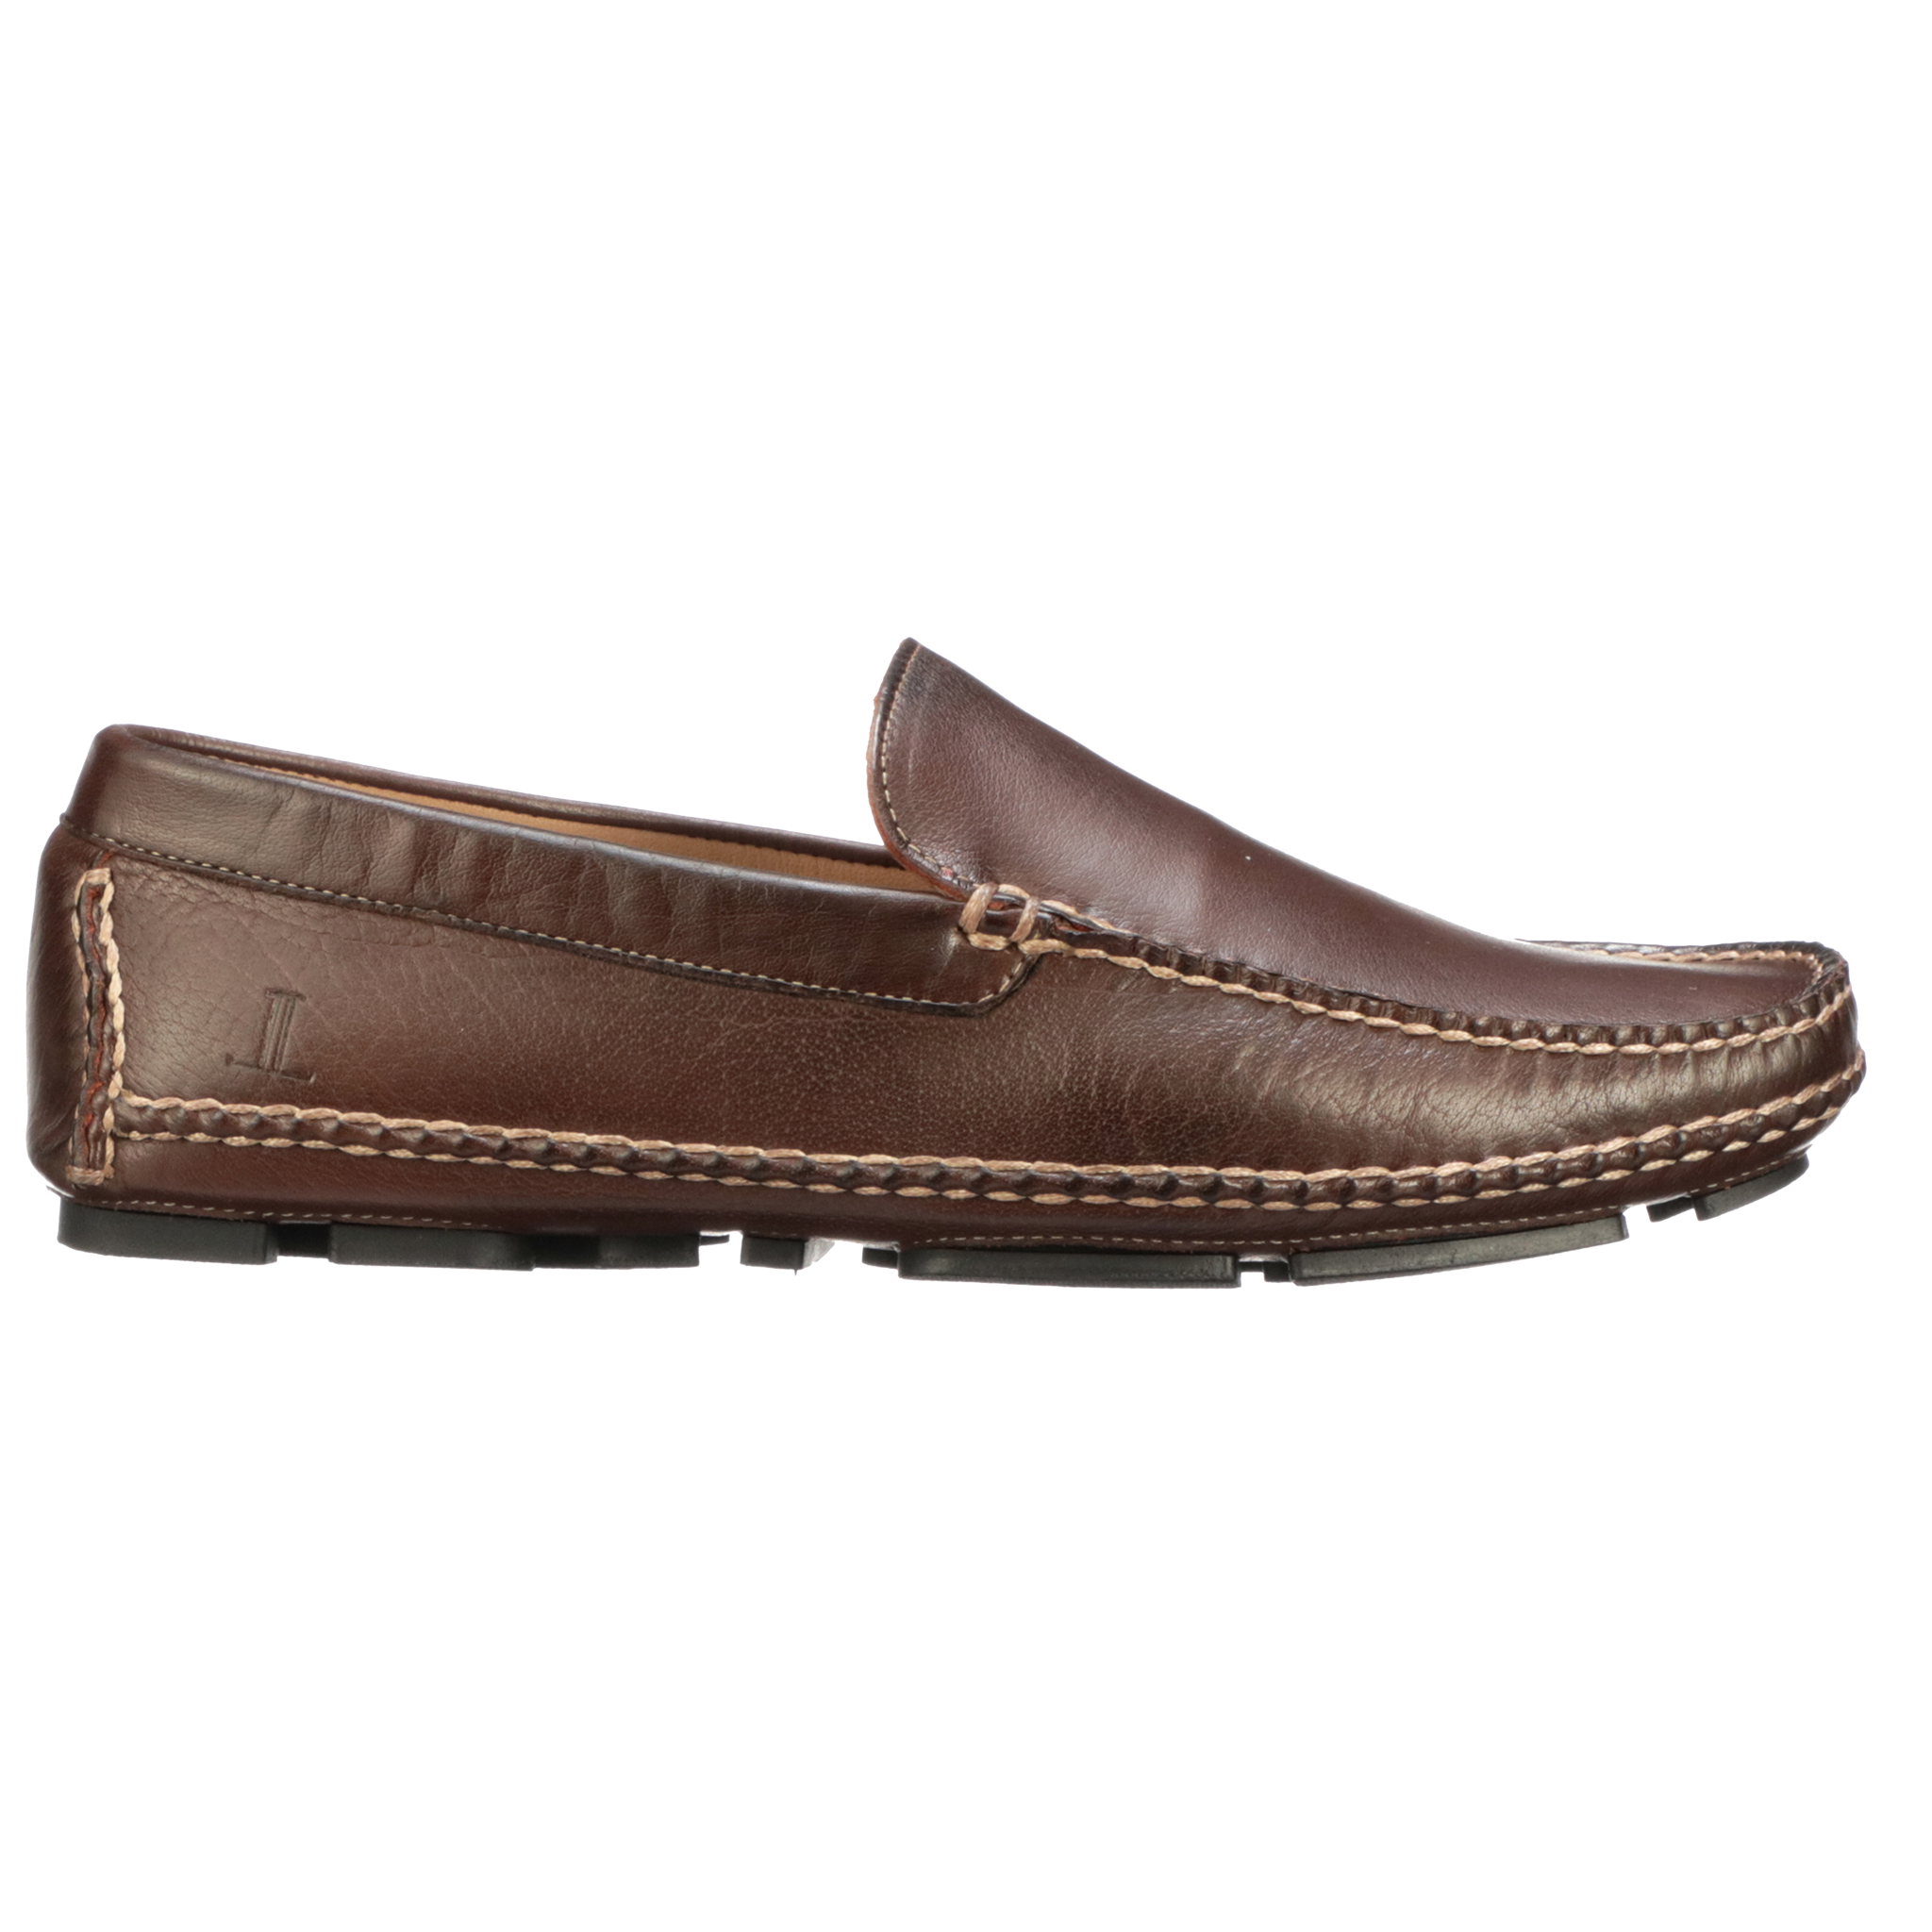 After-Ride Driving Moccasin - Lucchese